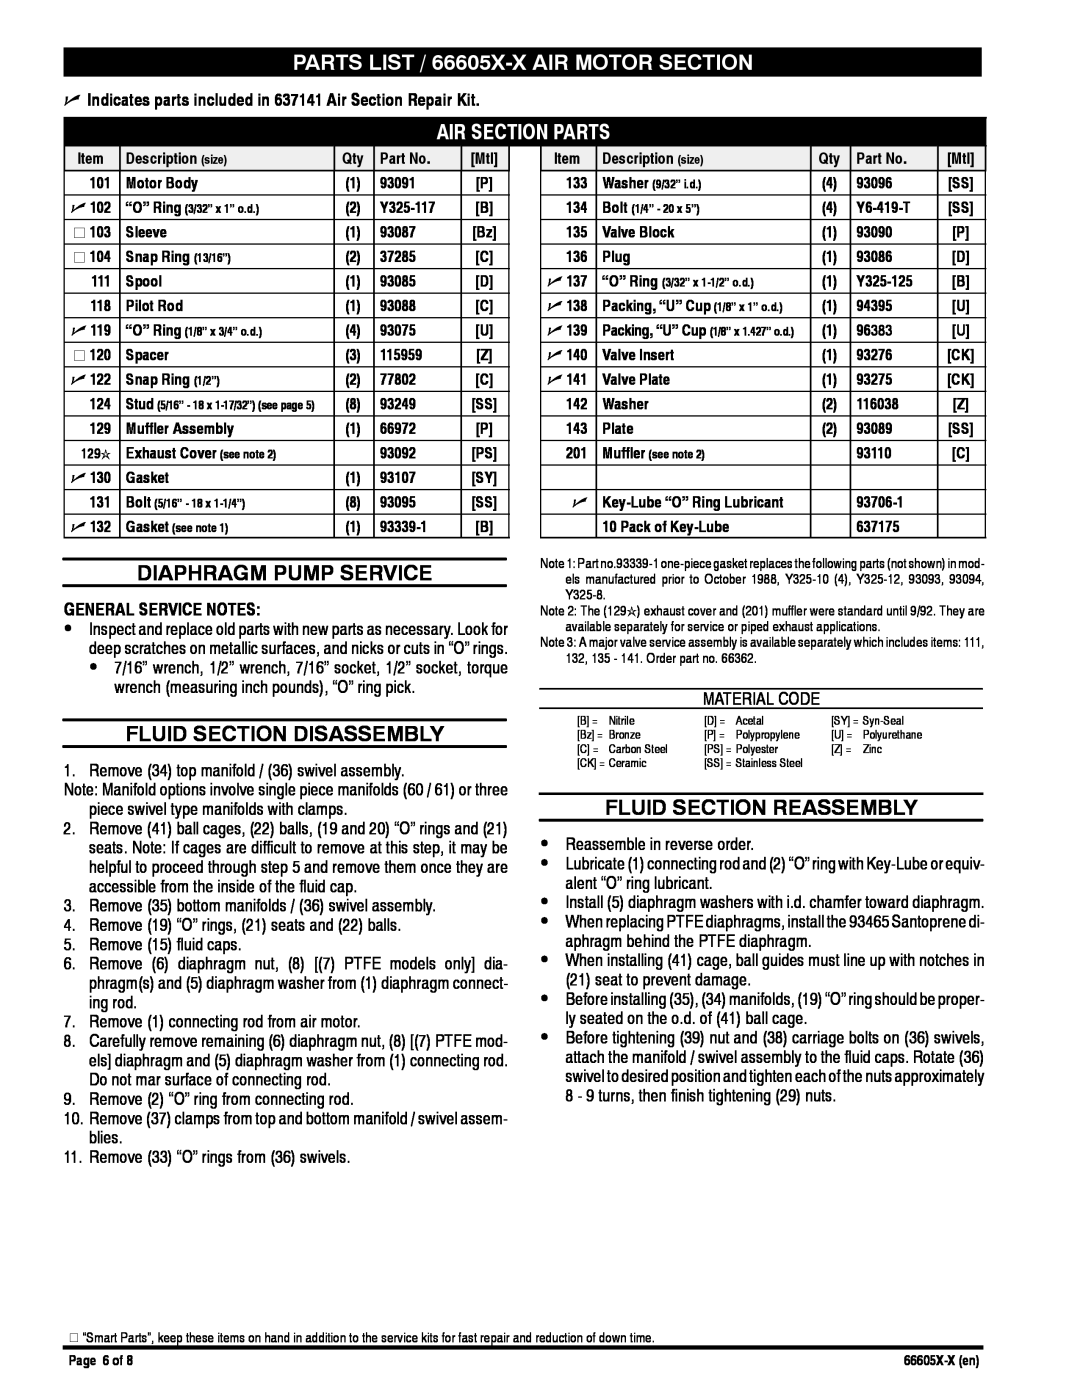 Ingersoll-Rand manual PARTS LIST / 66605X-XAIR MOTOR SECTION, Diaphragm Pump Service, Fluid Section Disassembly 